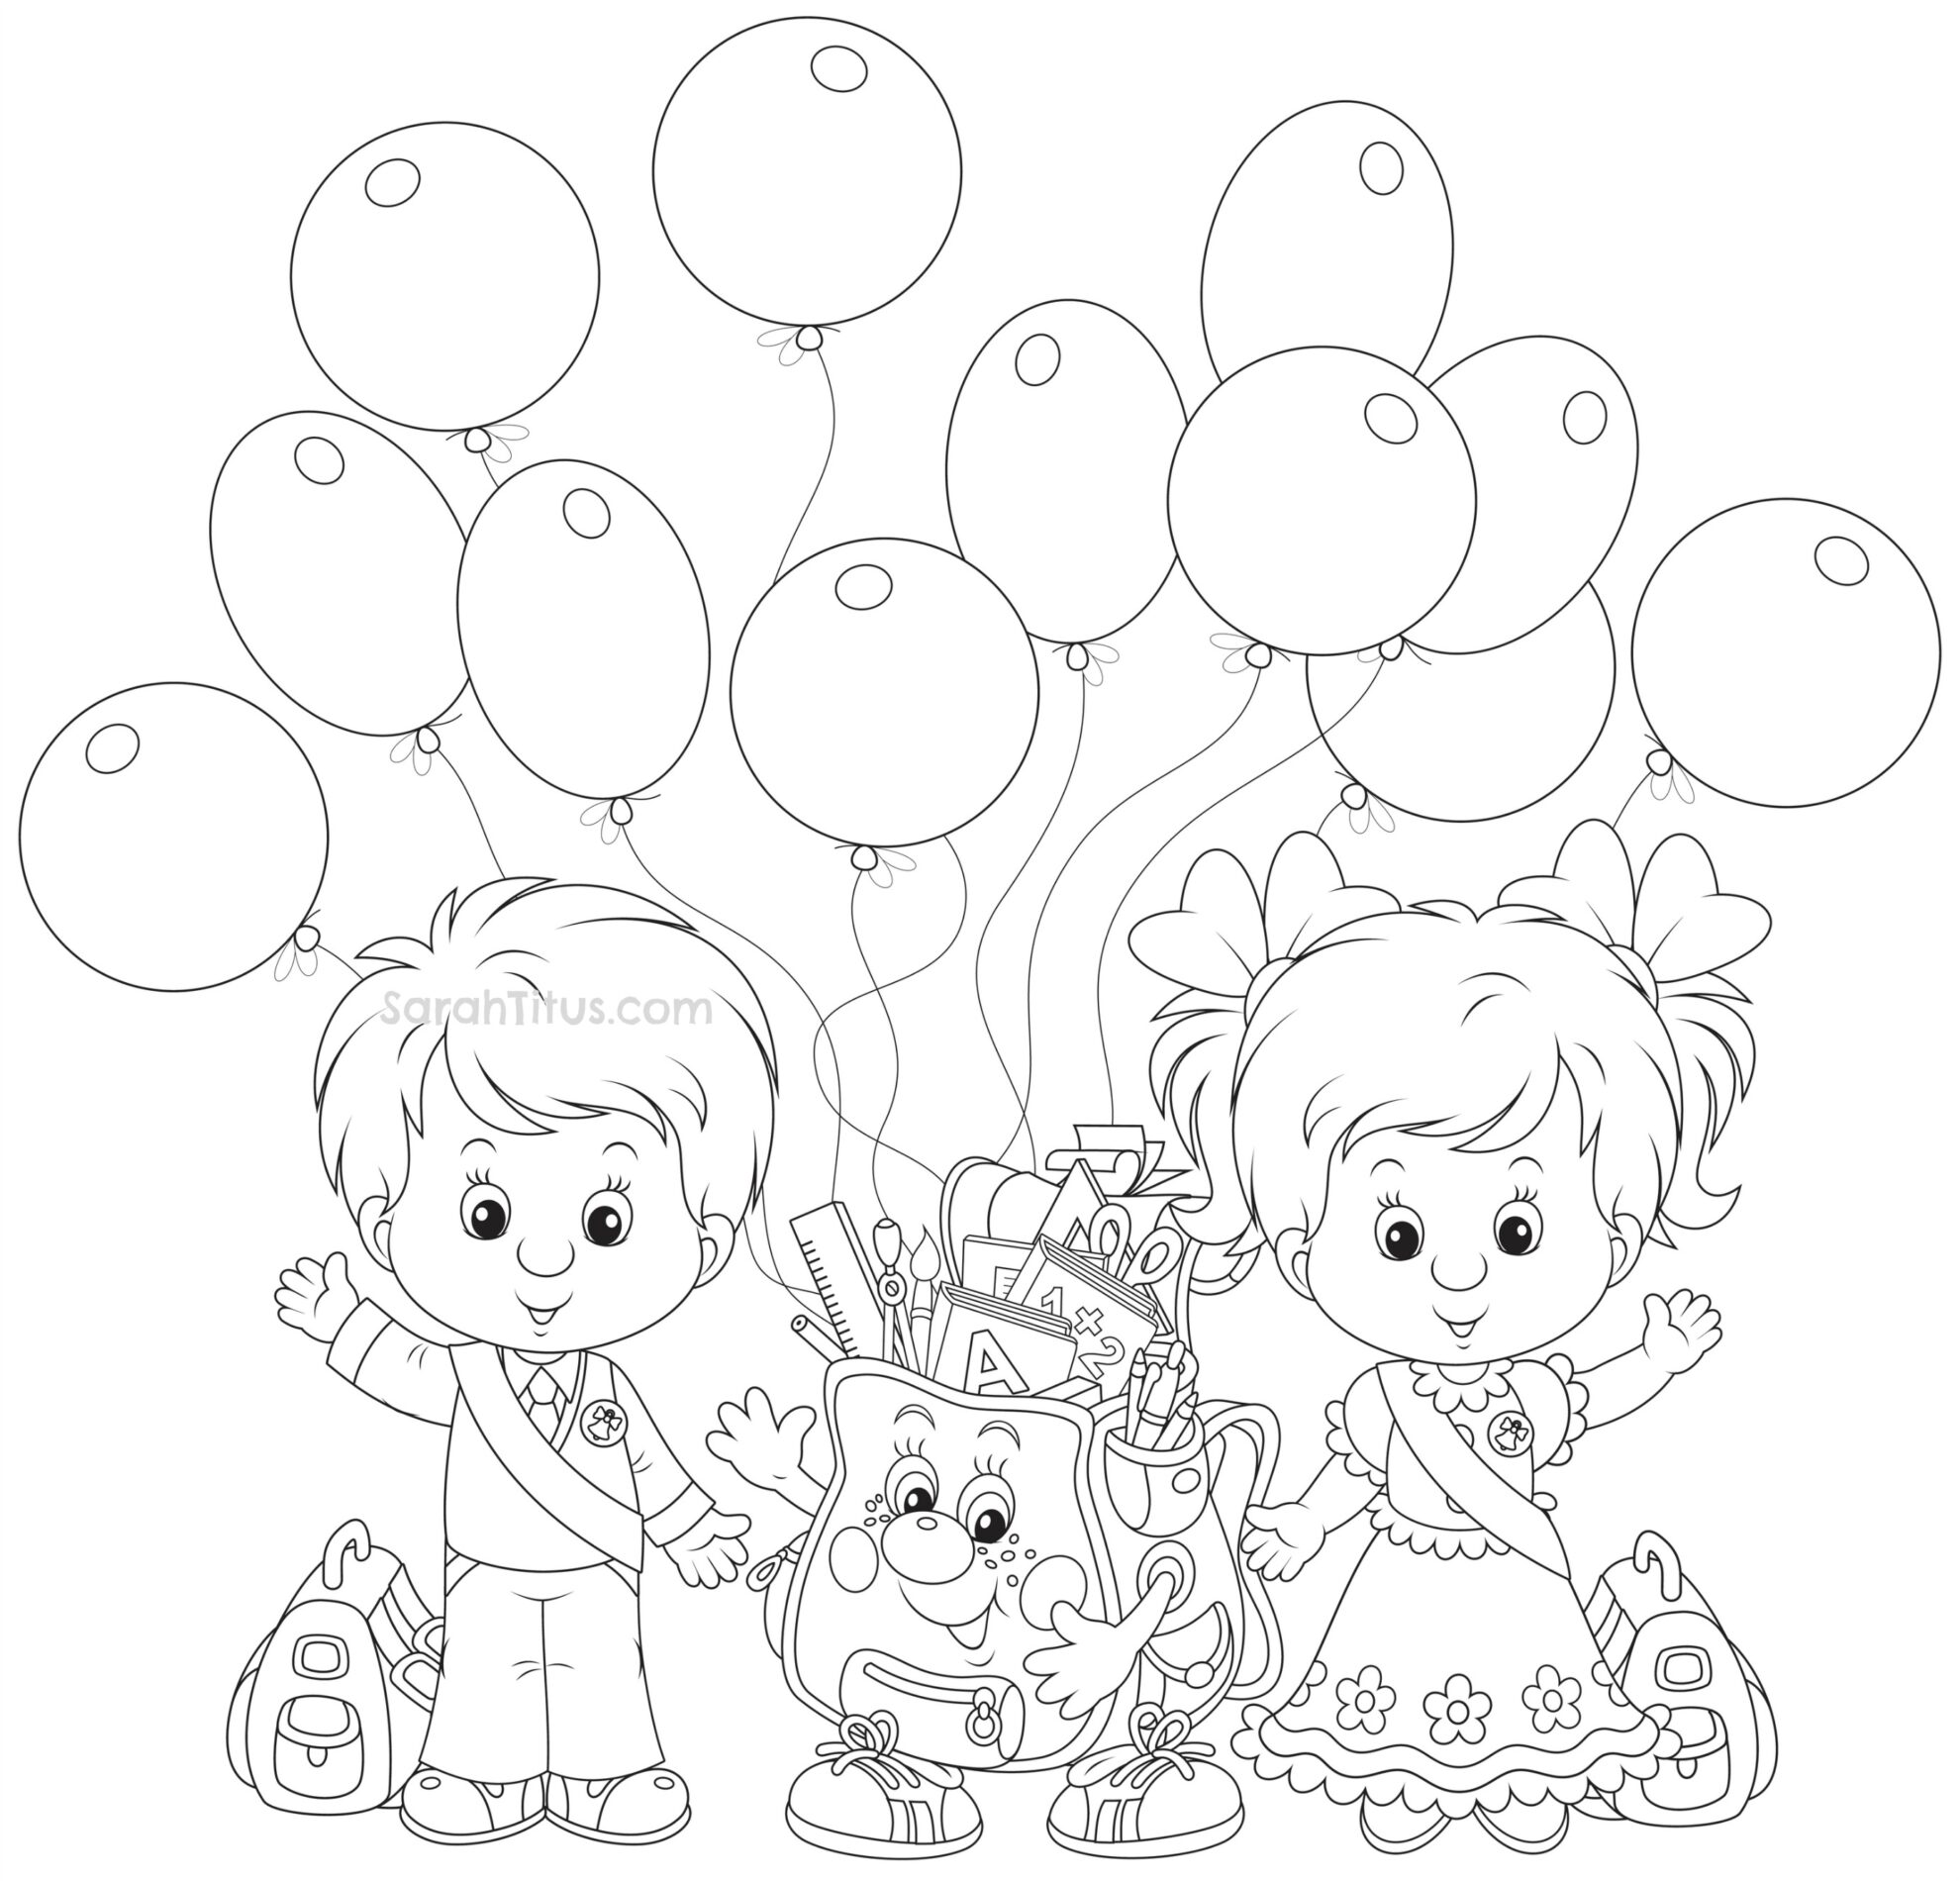 Back to School Coloring Pages - Sarah Titus